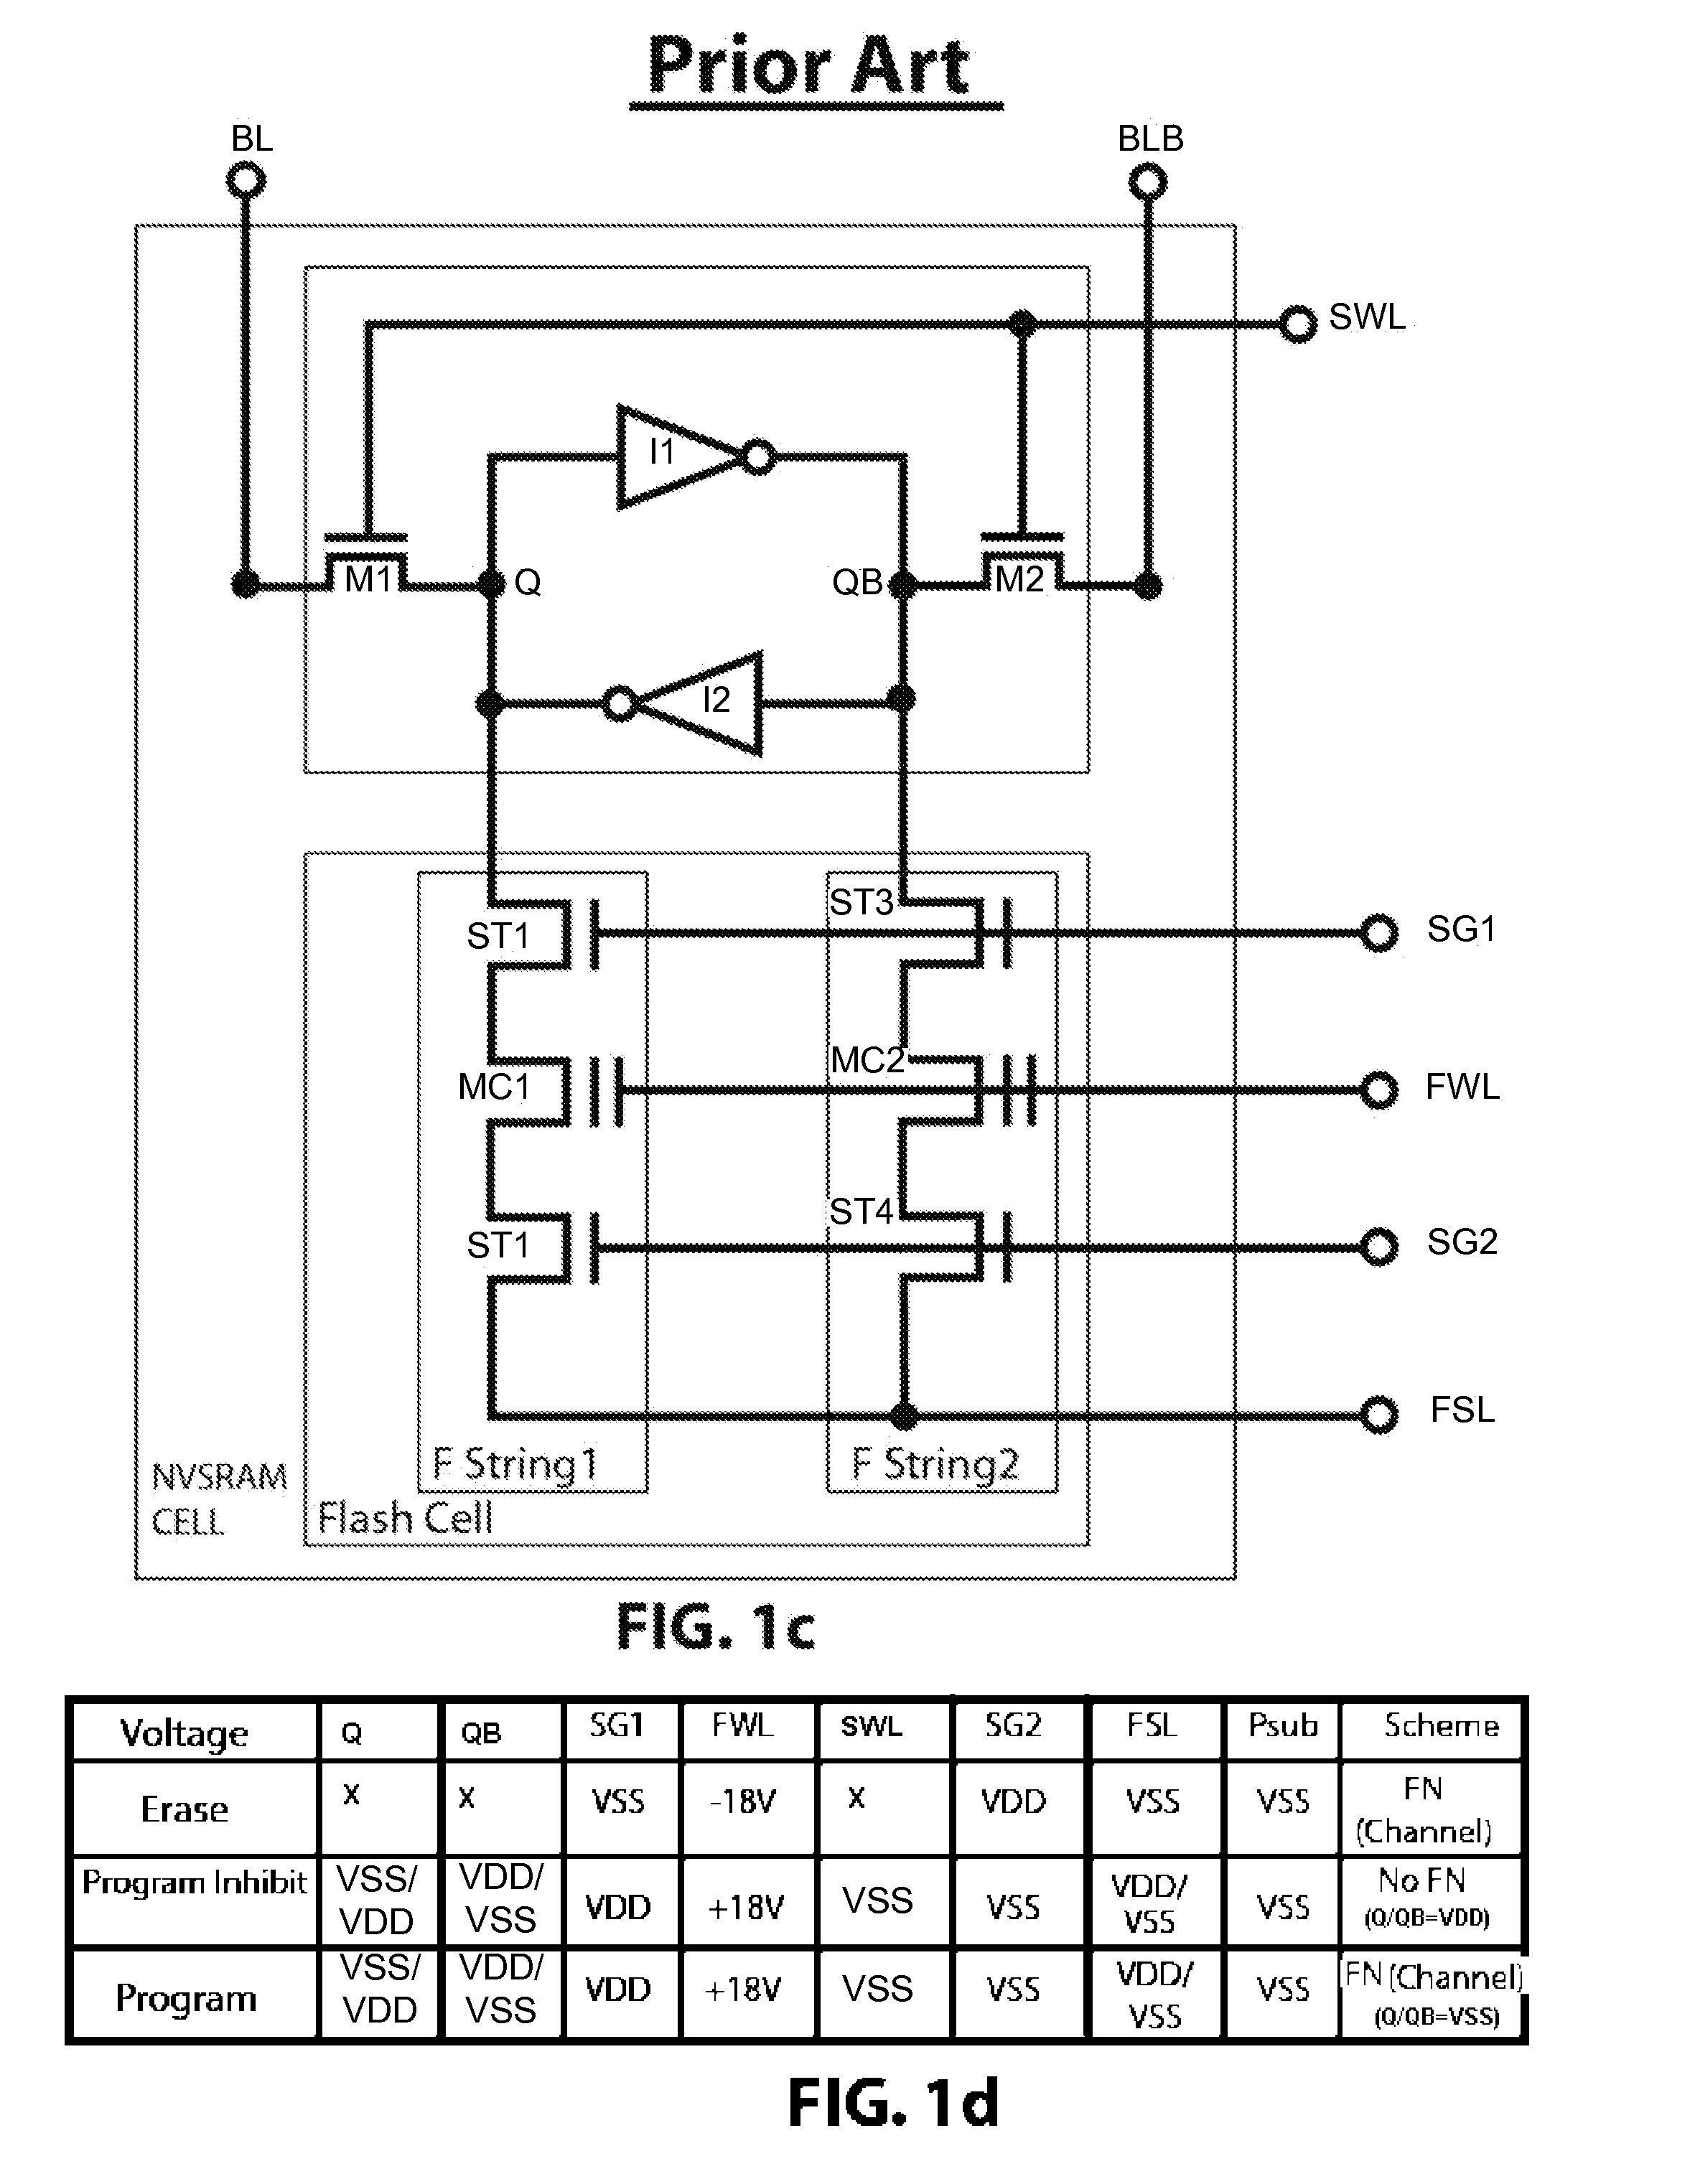 Low-voltage fast-write nvsram cell